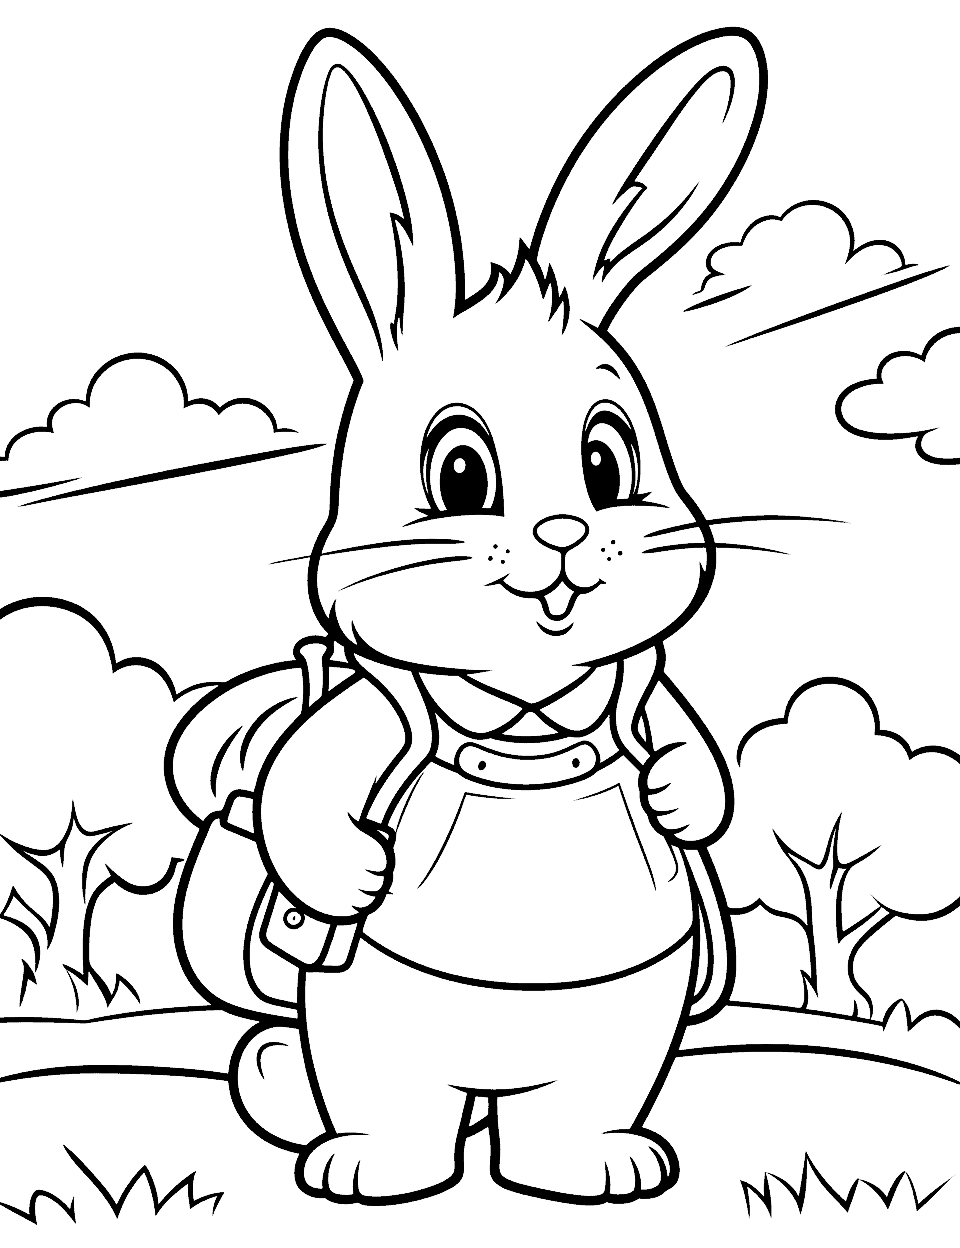 Bunny's Hike Bunny Coloring Page - A depiction of a bunny wearing a backpack hiking through the wilderness.